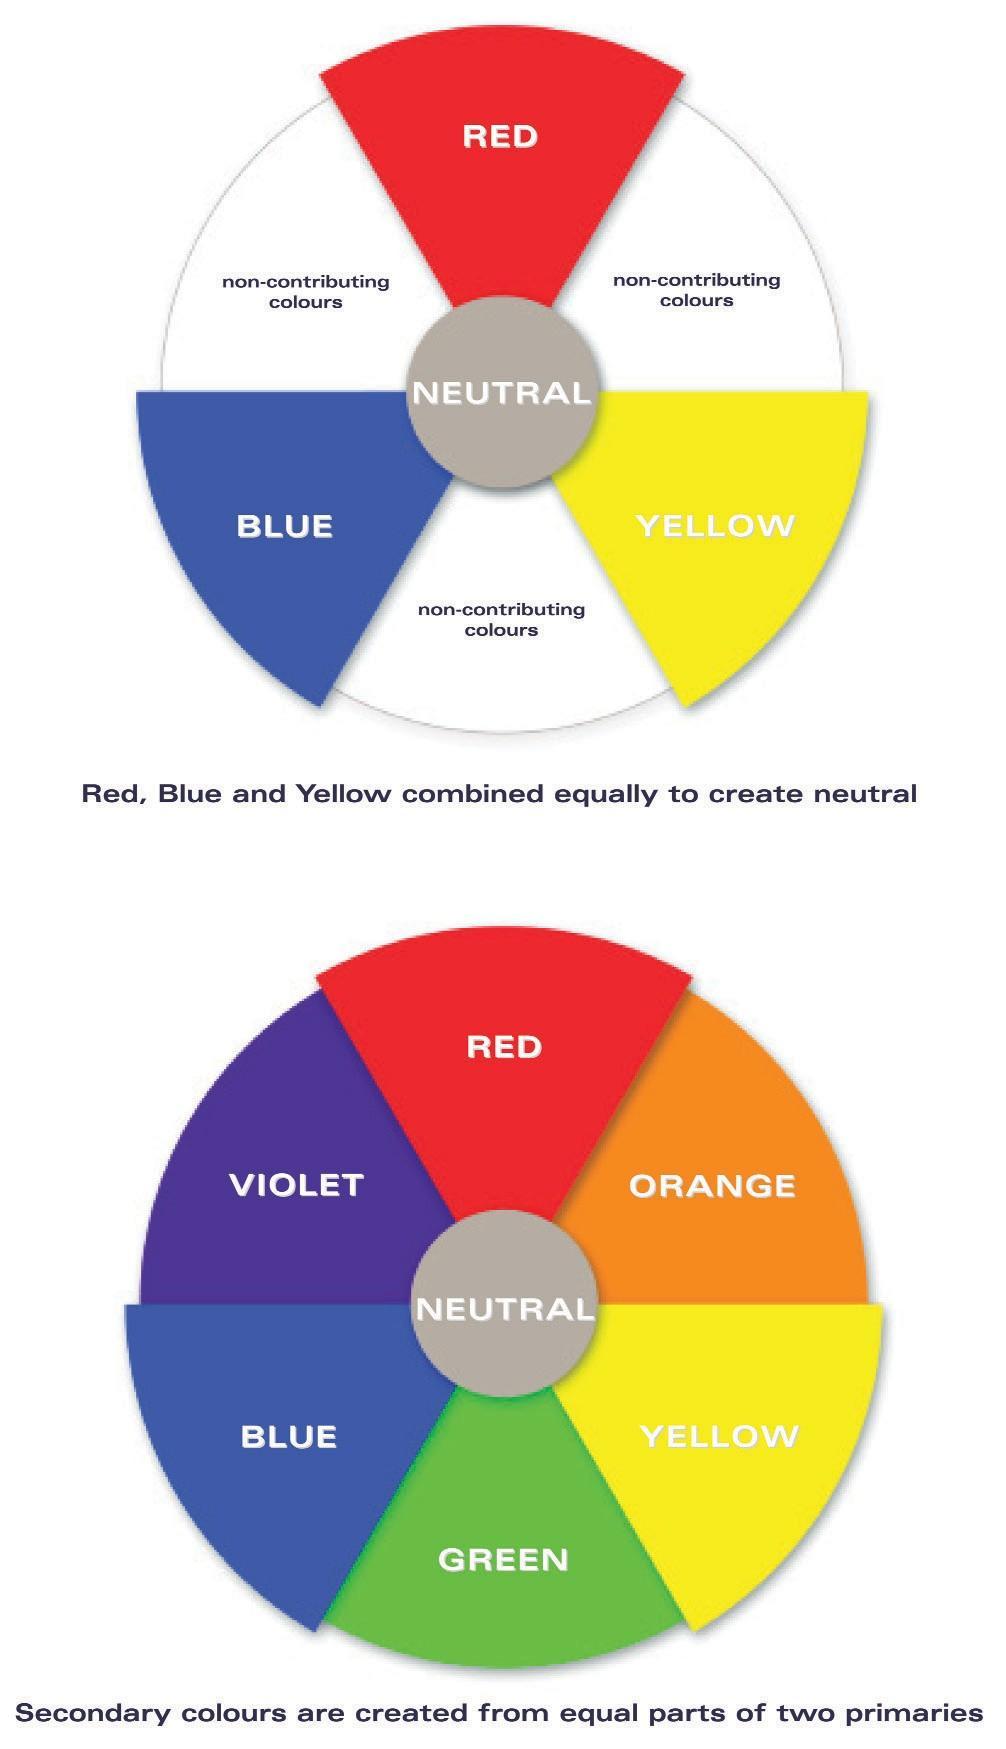 PLATE 3 Red, Blue and Yellow combined equally to create neutral